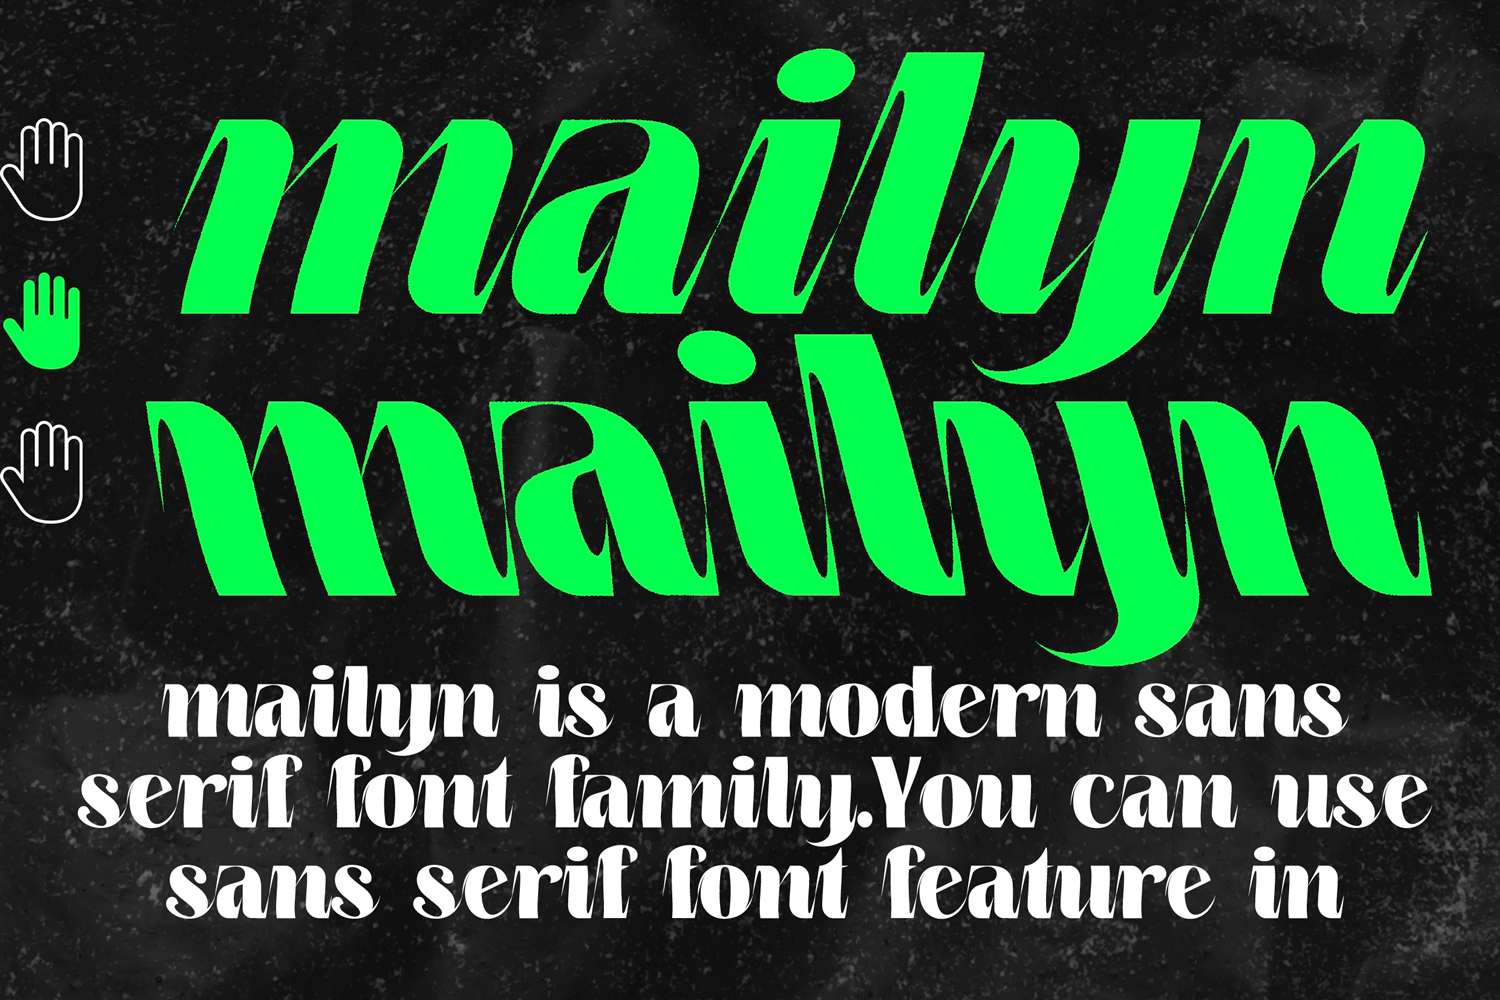 mailyn font